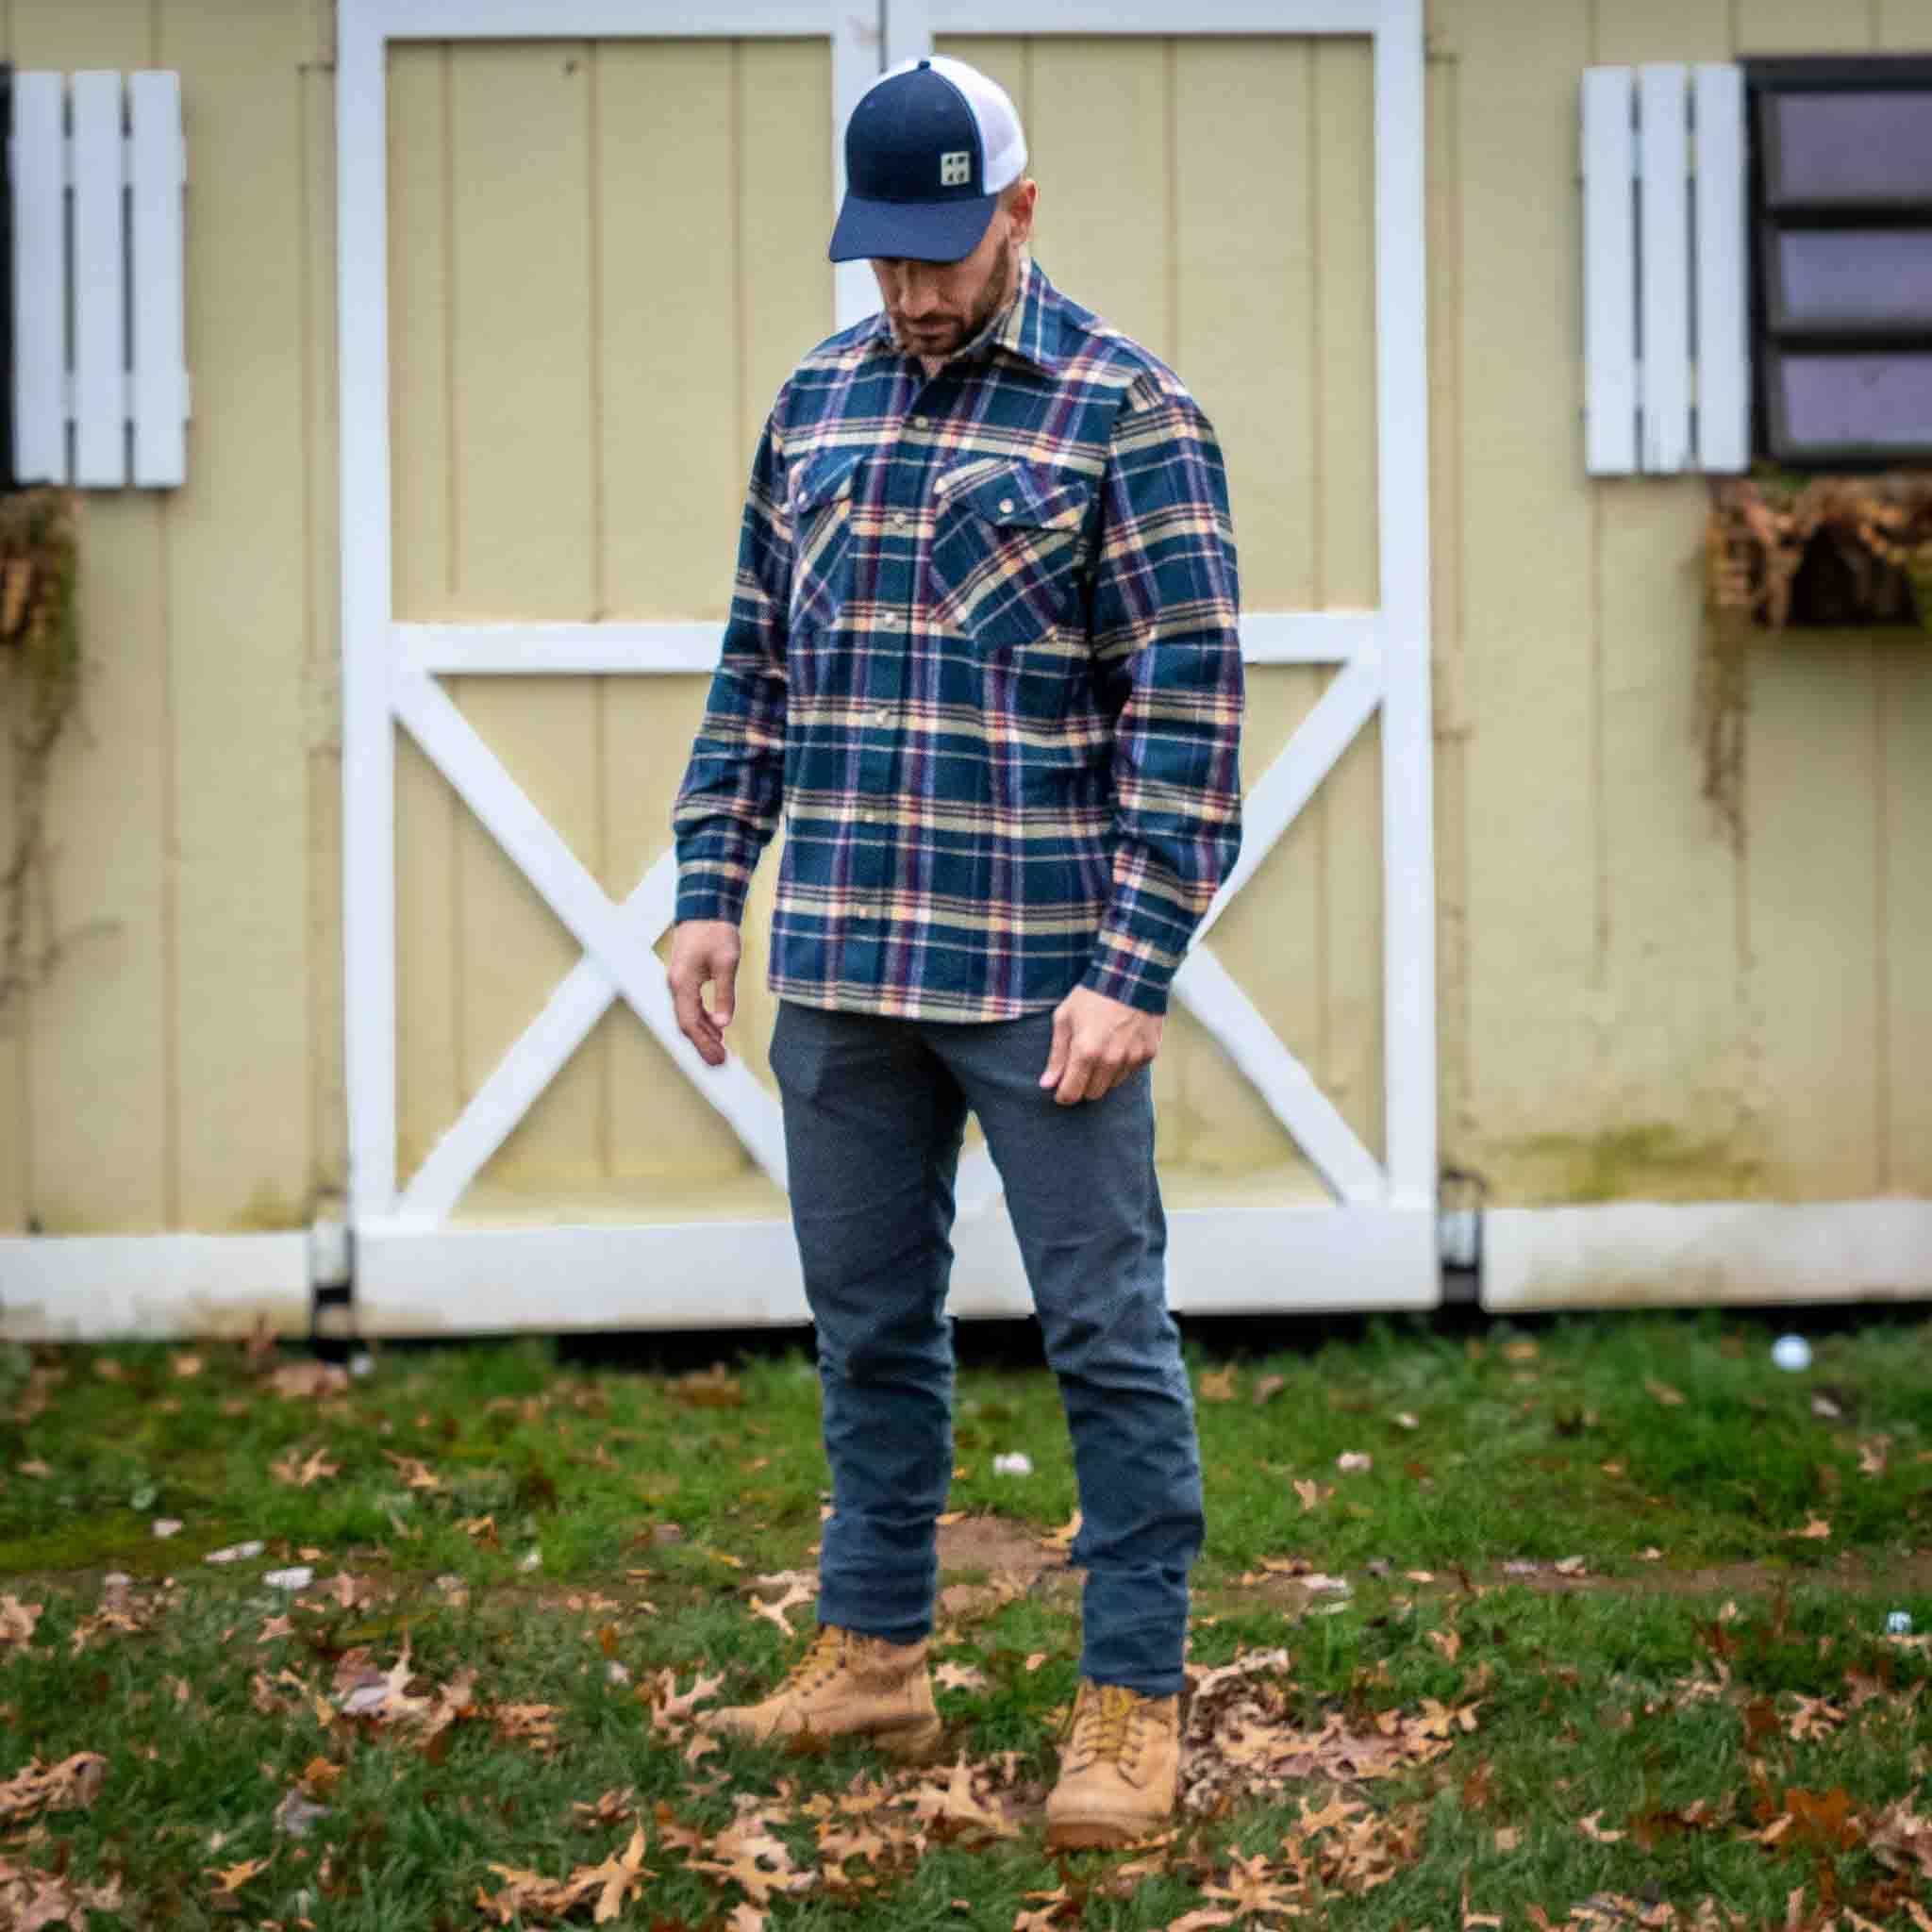 JWM Mens Flannel LS Button Down Navy-Spruce-Tan Compare at $198  ( Allow 1-2 weeks for delivery )